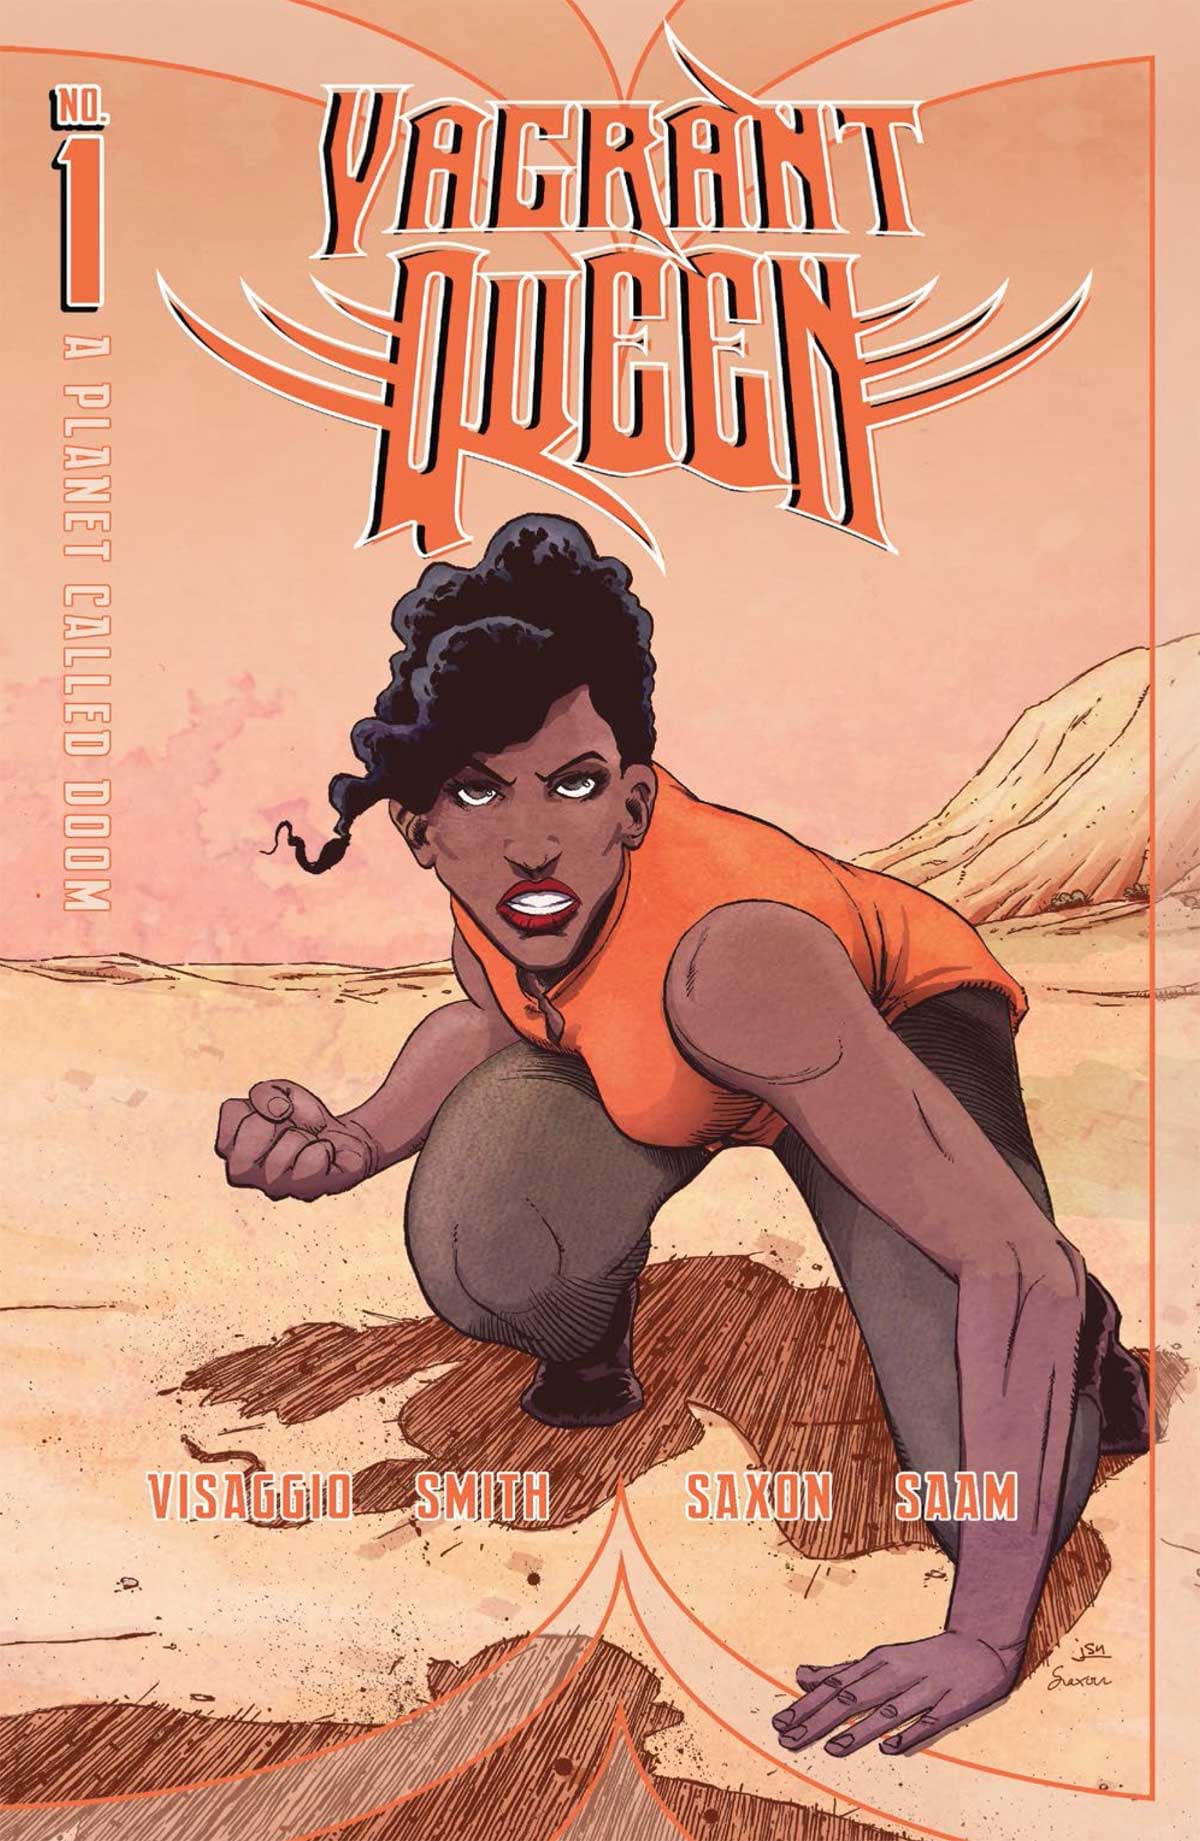 REVIEW: Vagrant Queen A Planet Called Doom #1 -- "Reads Like A Second Issue Far More Than A First"